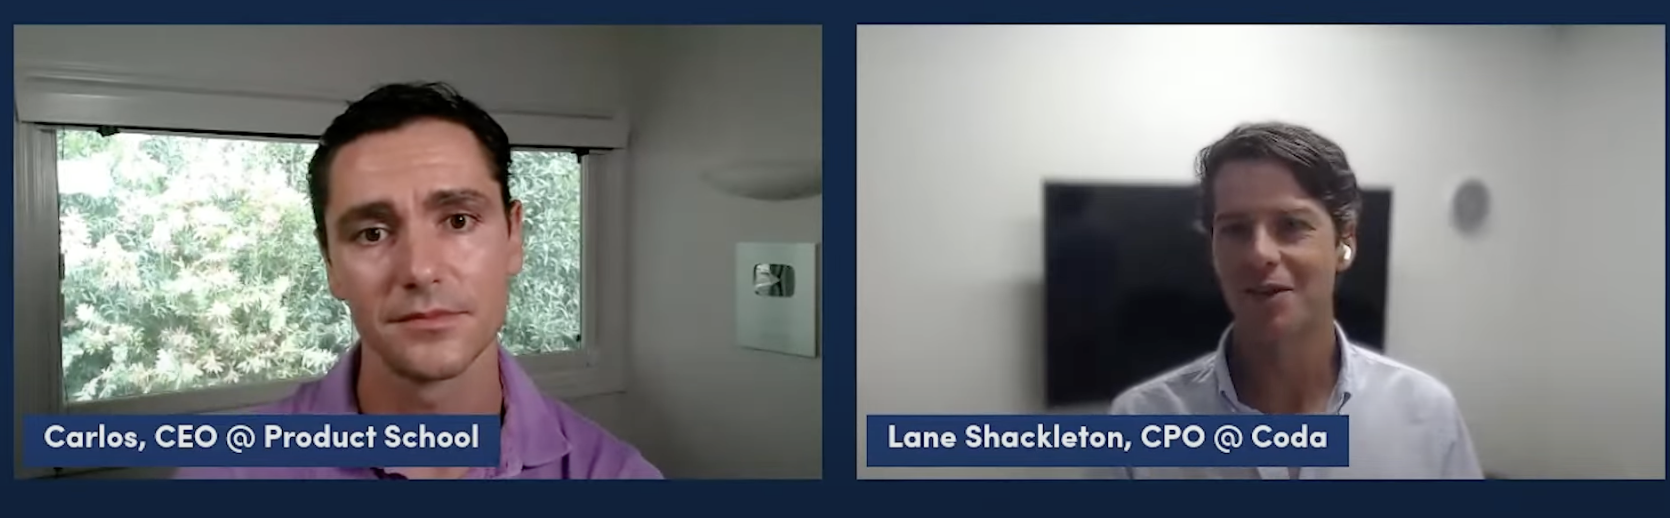 Fireside chat: Carlos and Lane Shackleton